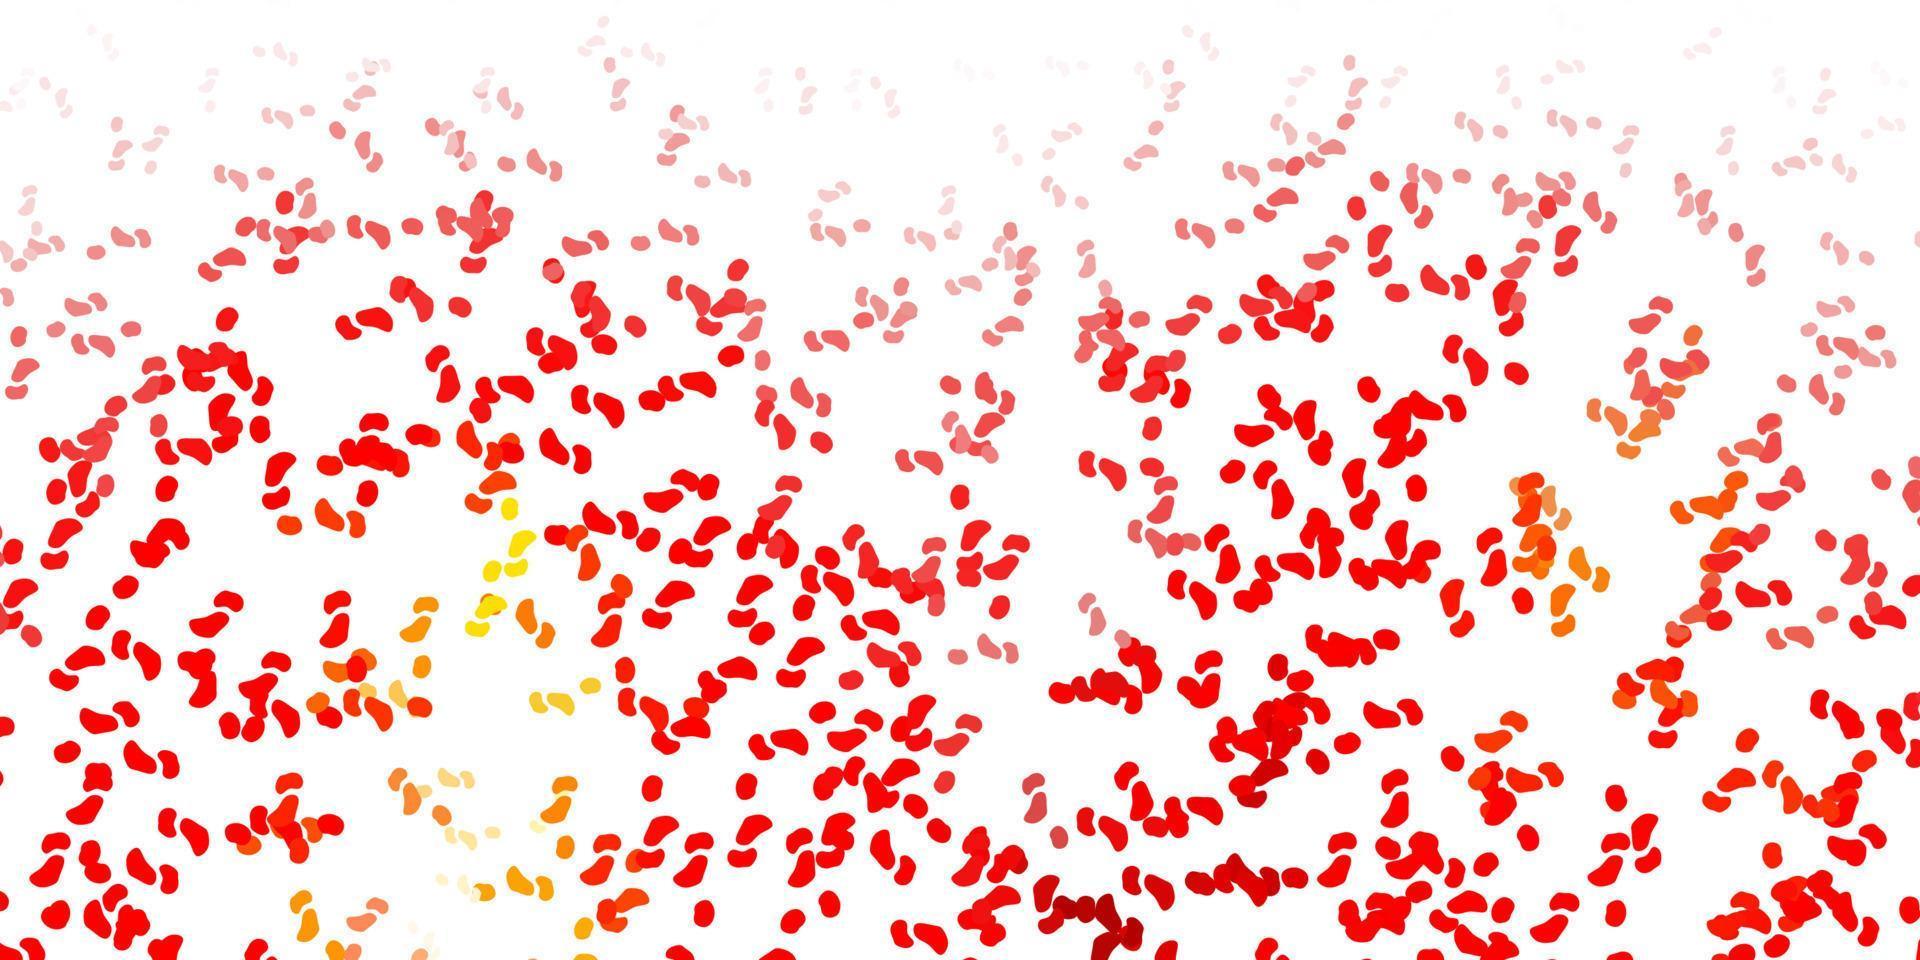 Light red, yellow vector background with random forms.